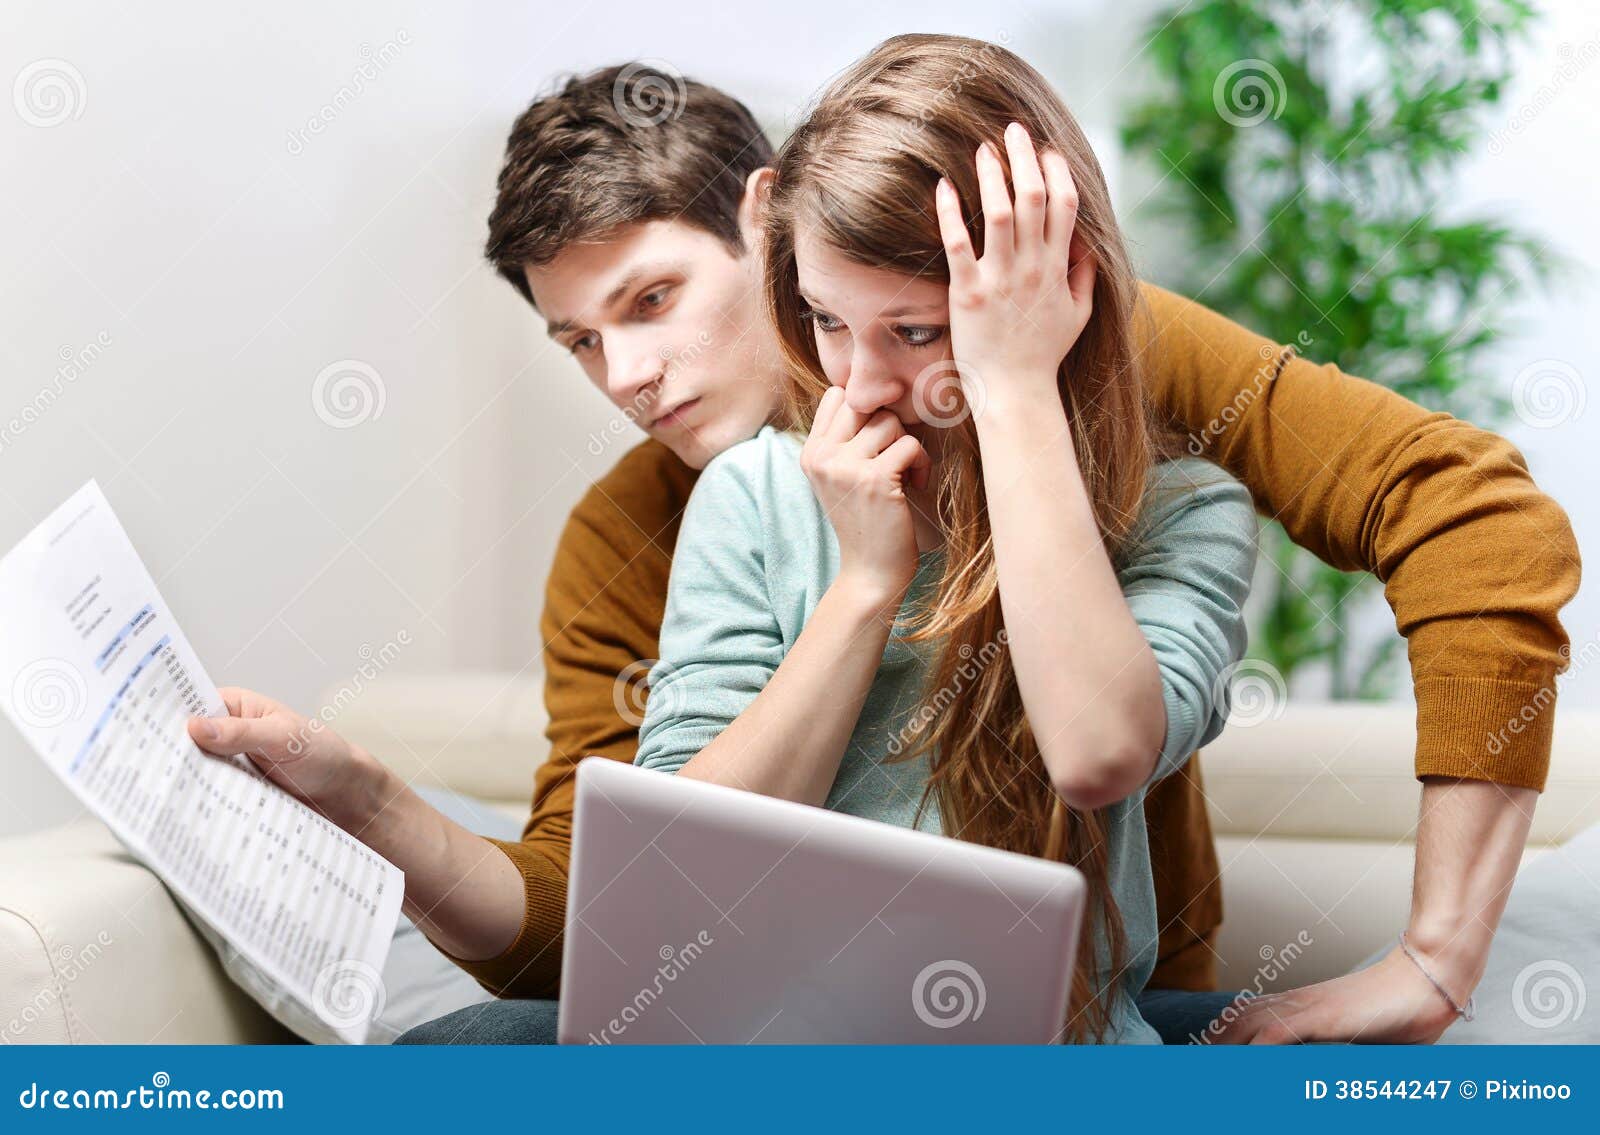 young anxious couple consults their bank account